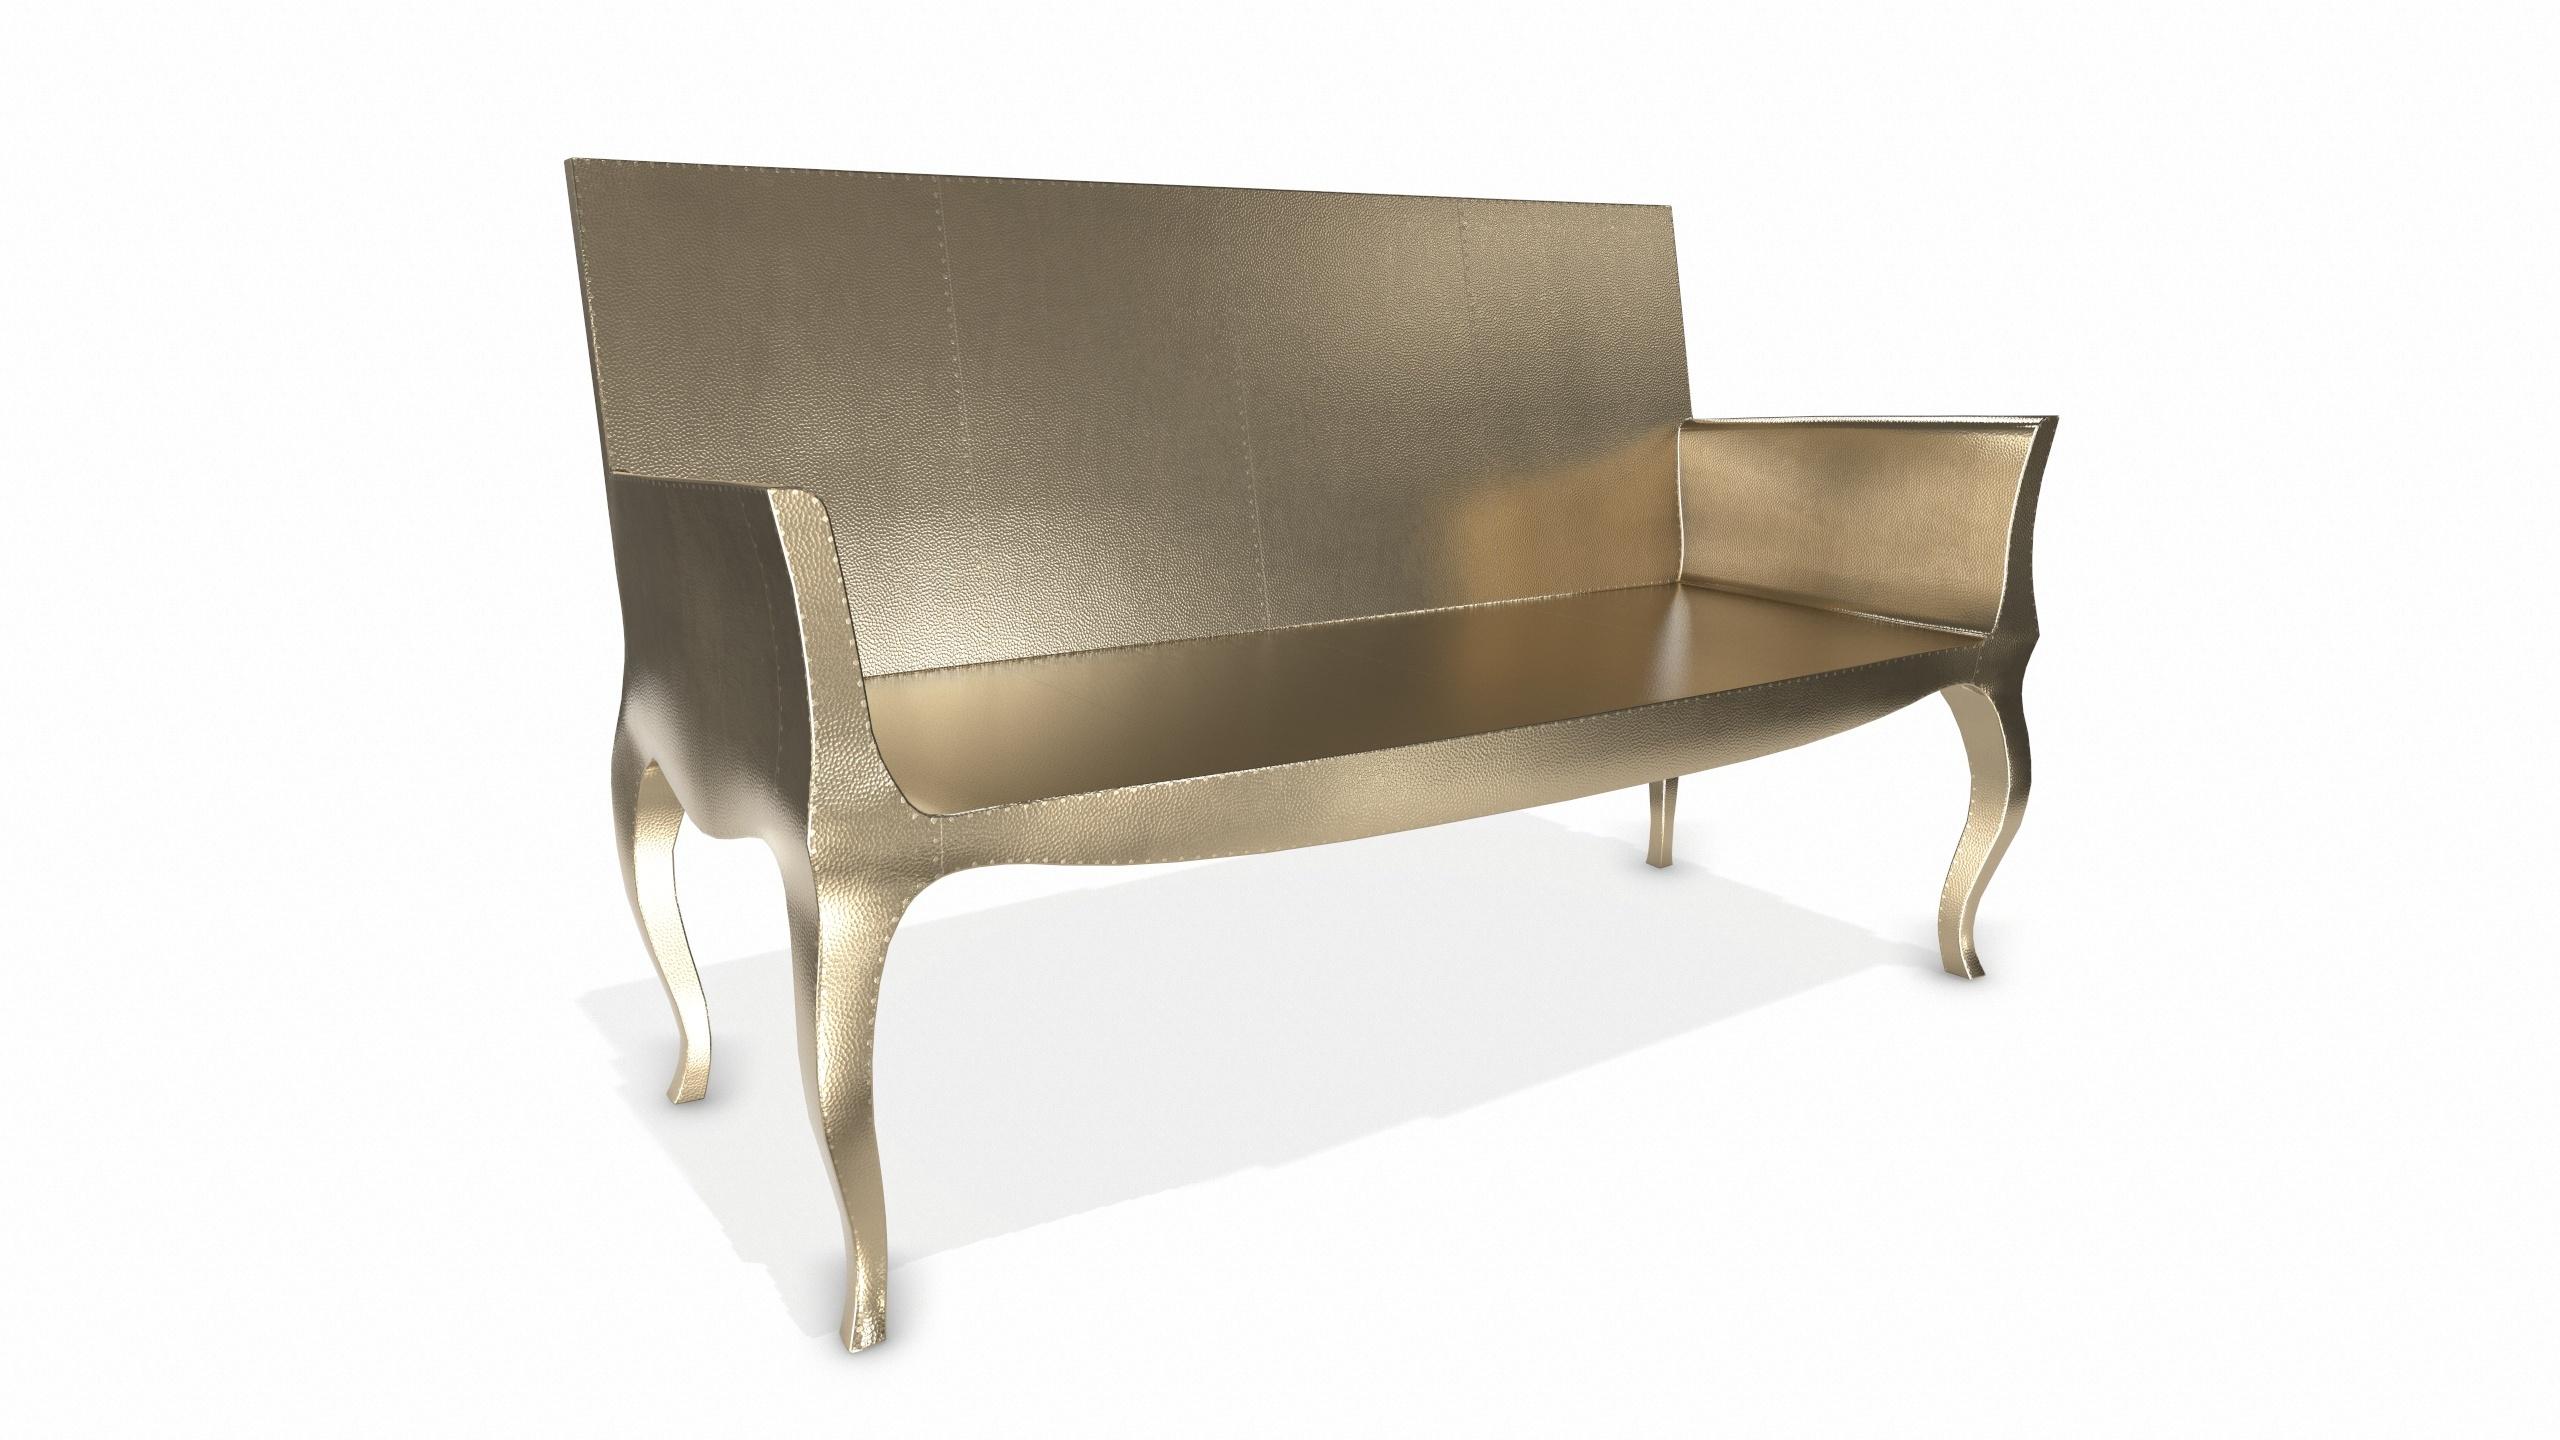 Contemporary Louise Settee Art Deco Living Room Sets in Mid. Hammered Brass by Paul Mathieu For Sale